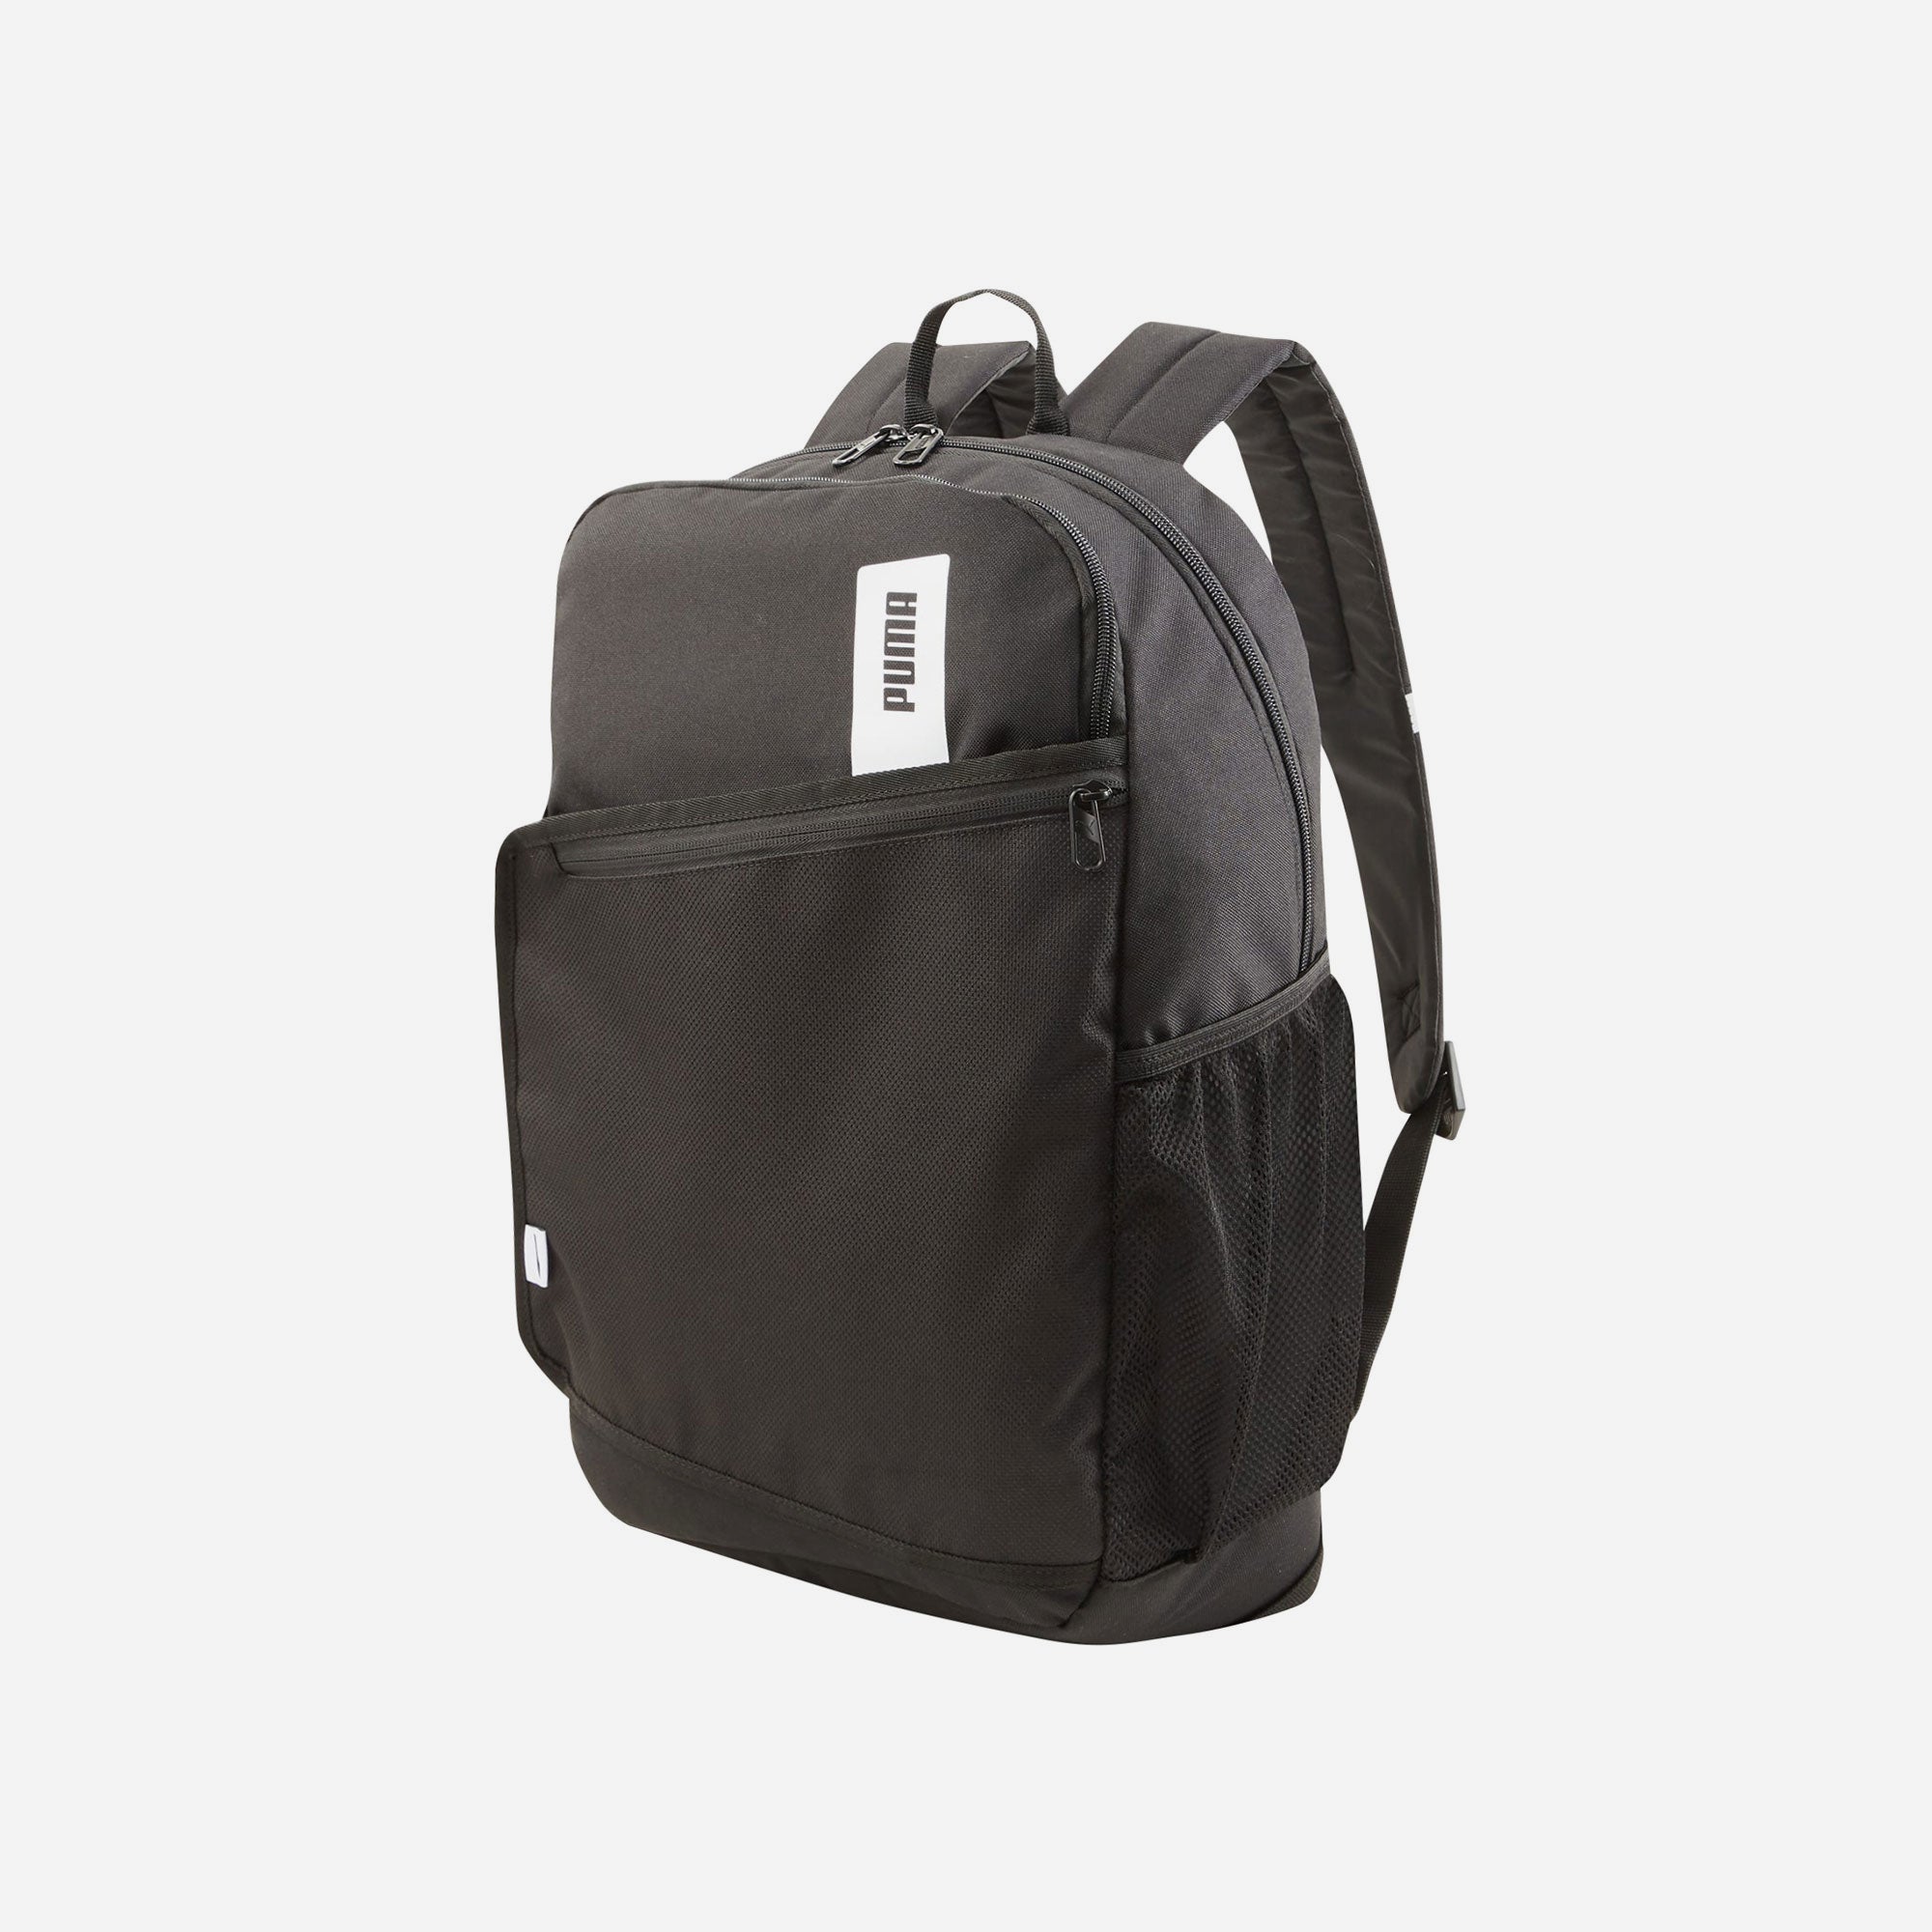 Balo Thể Thao Puma Deck Backpack Ii - Supersports Vietnam